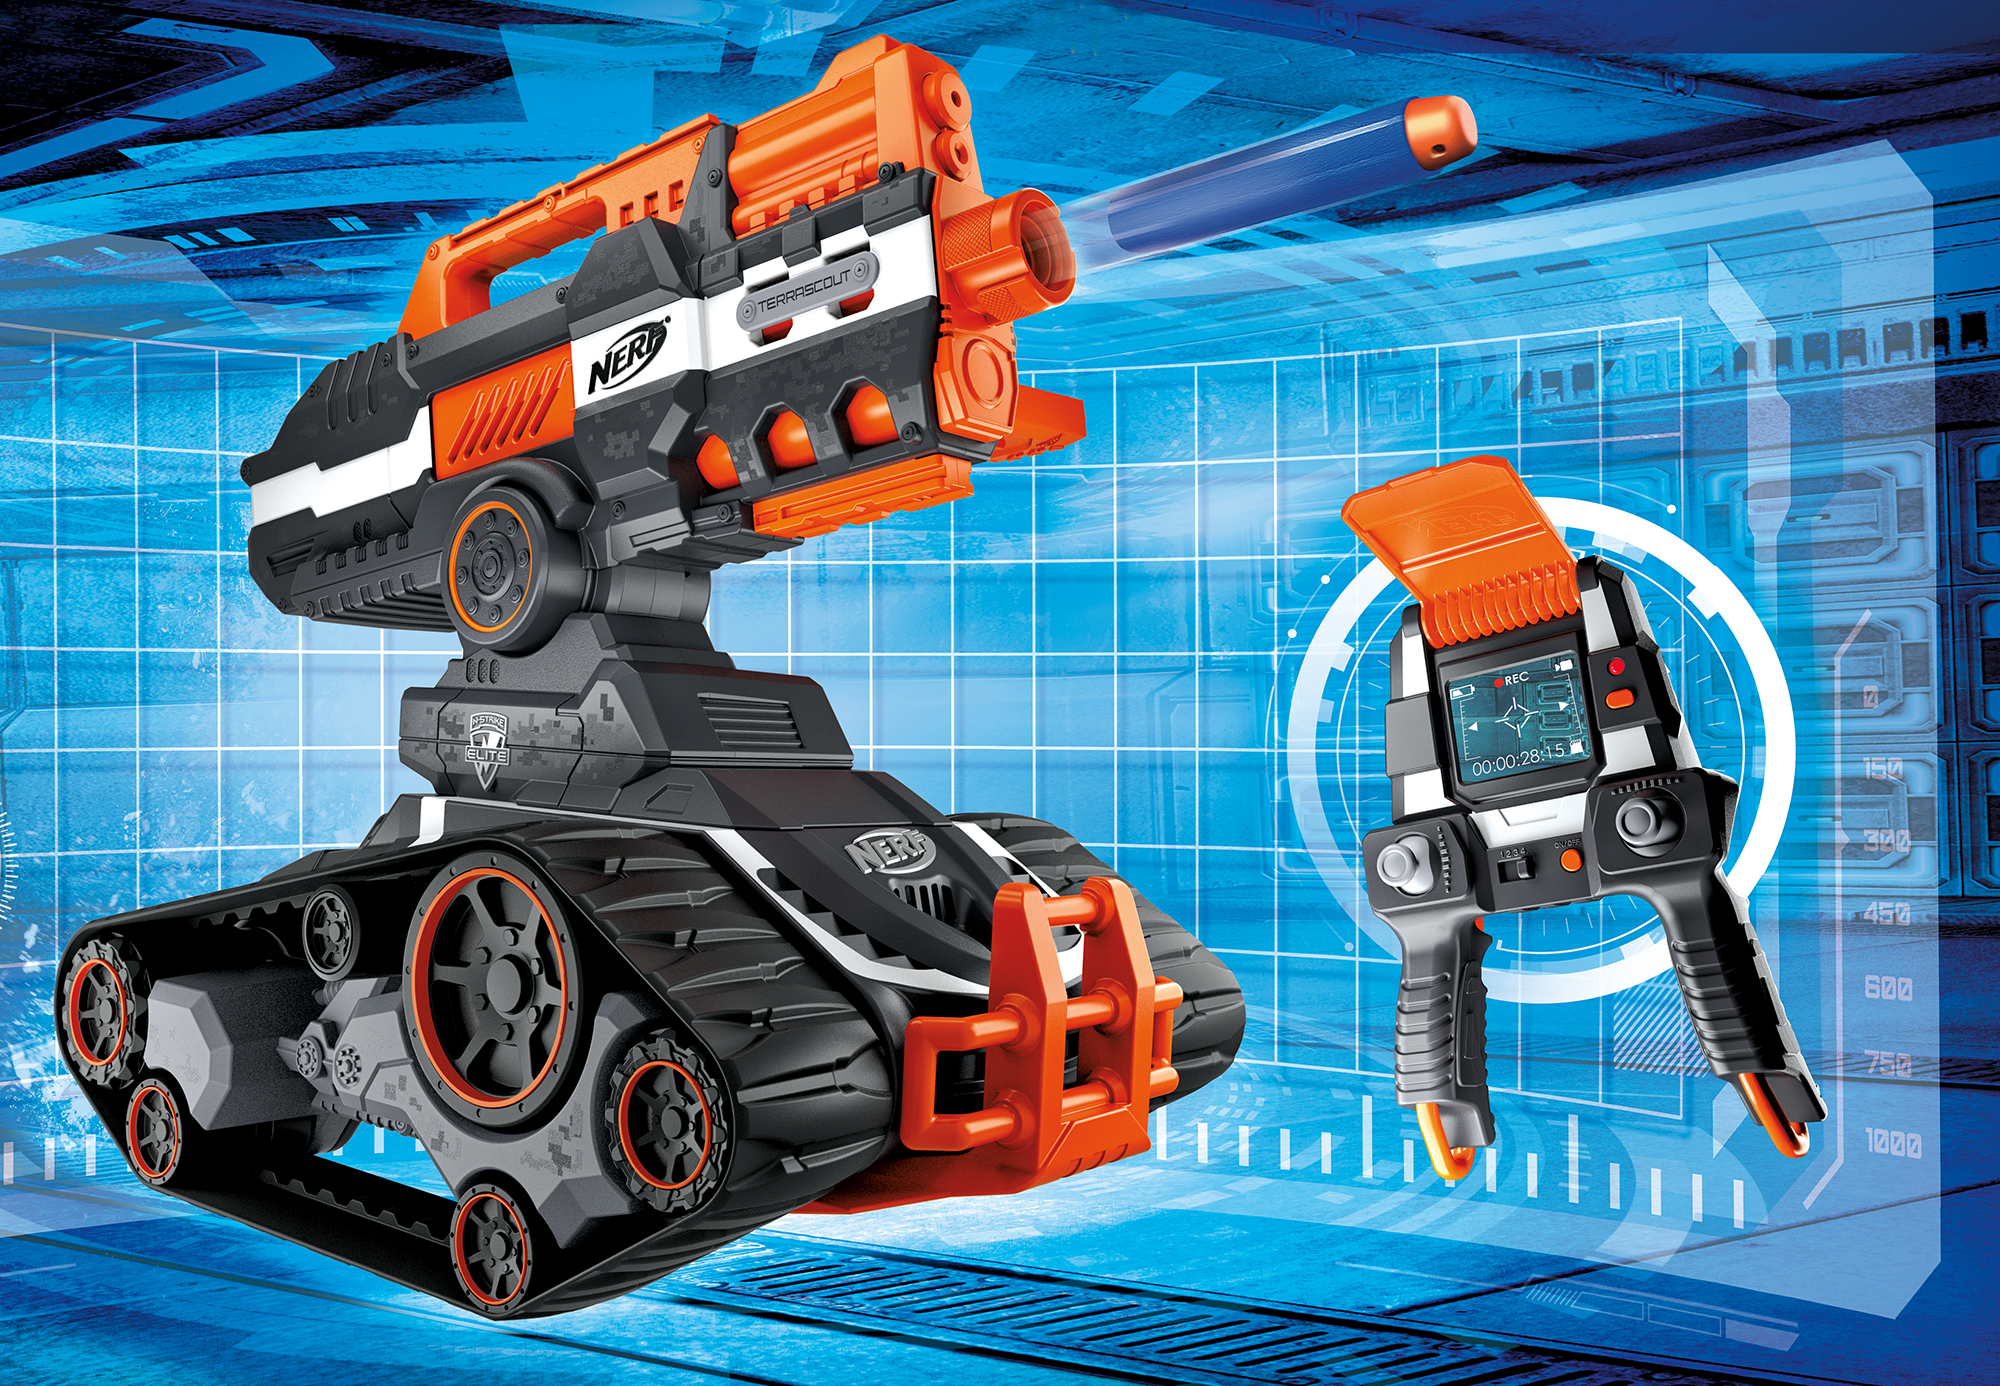 Nerf’s New Dart-Blasting RC Battle Tank Is Straight Out Of Terminator